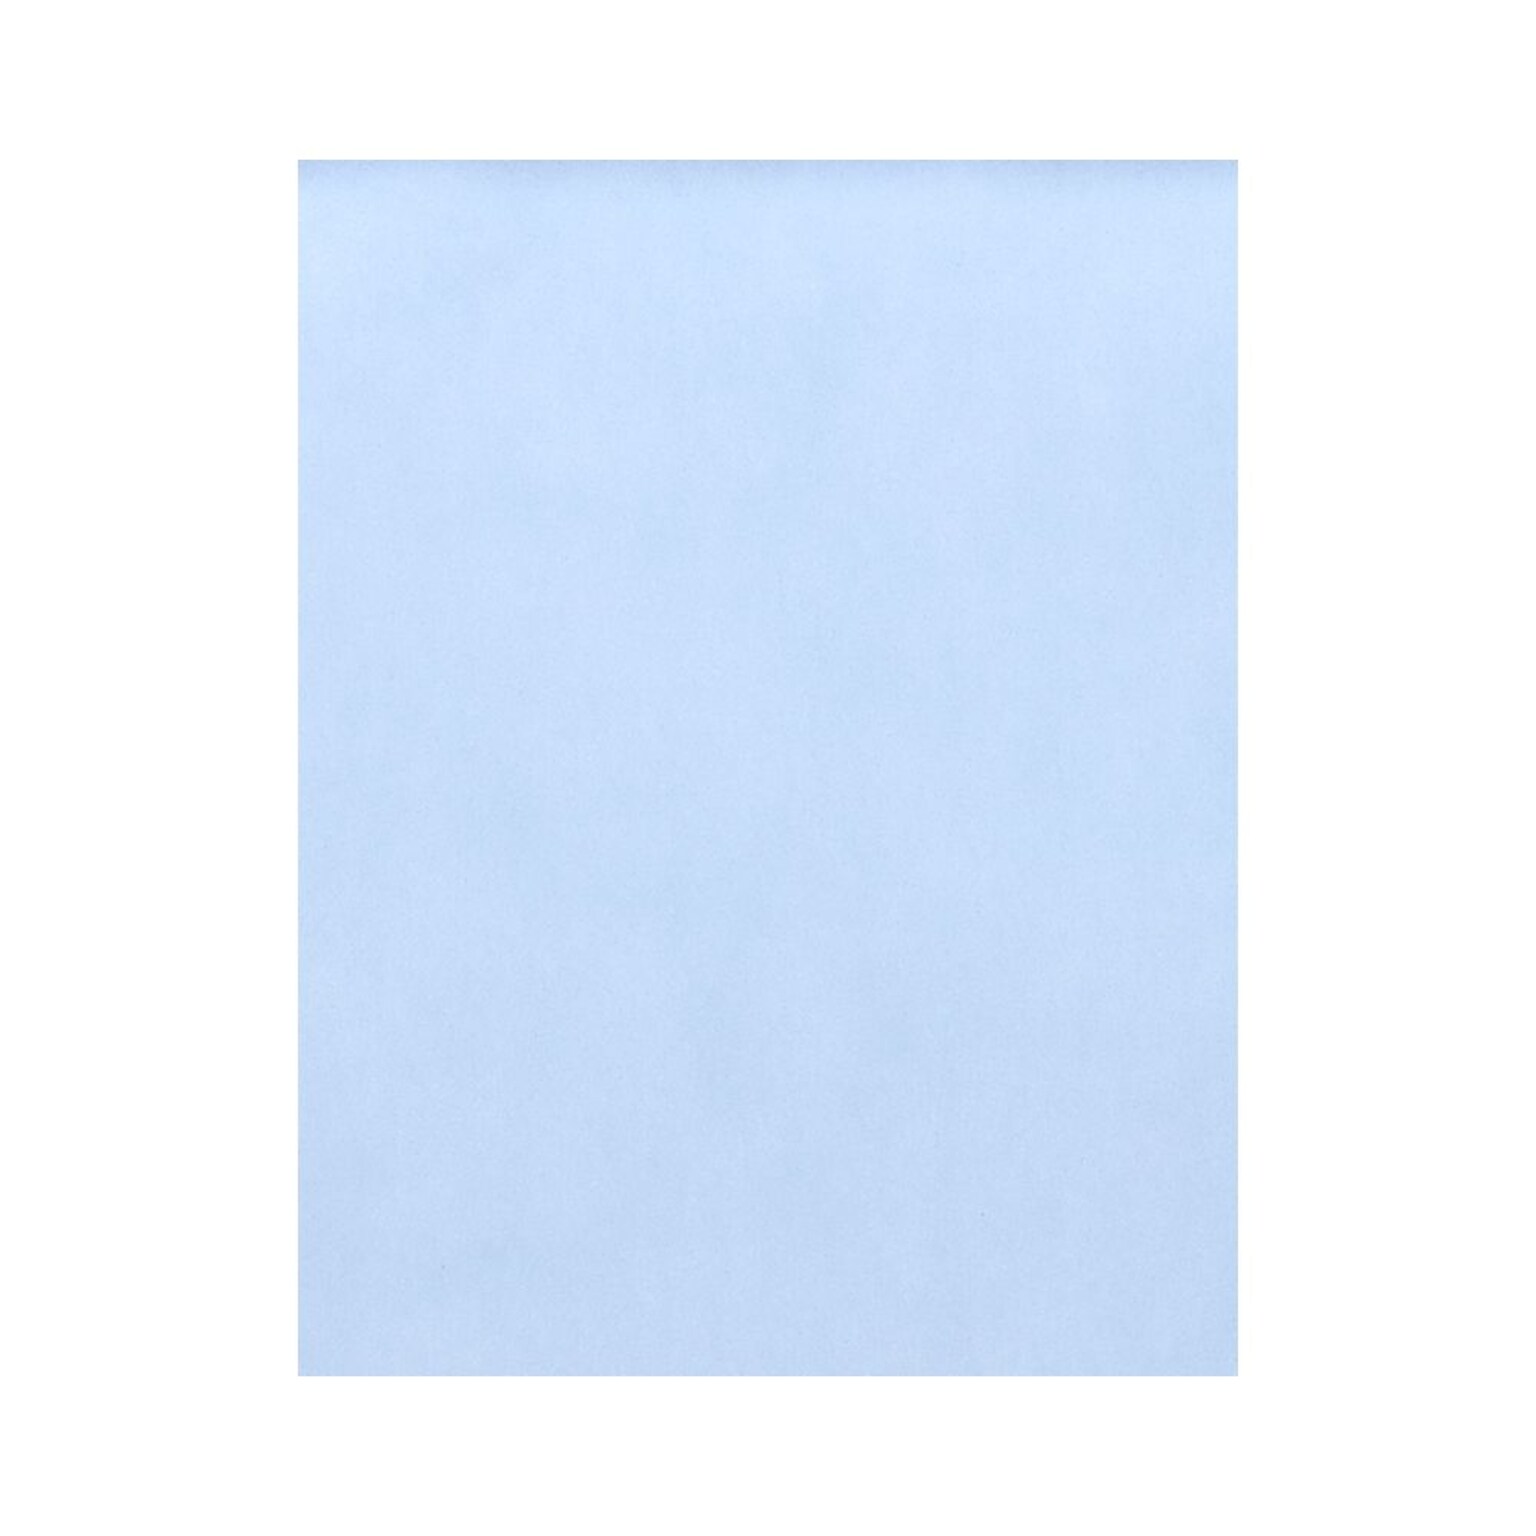 Lux Cardstock 8.5 x 11 inch Baby Blue 50/Pack